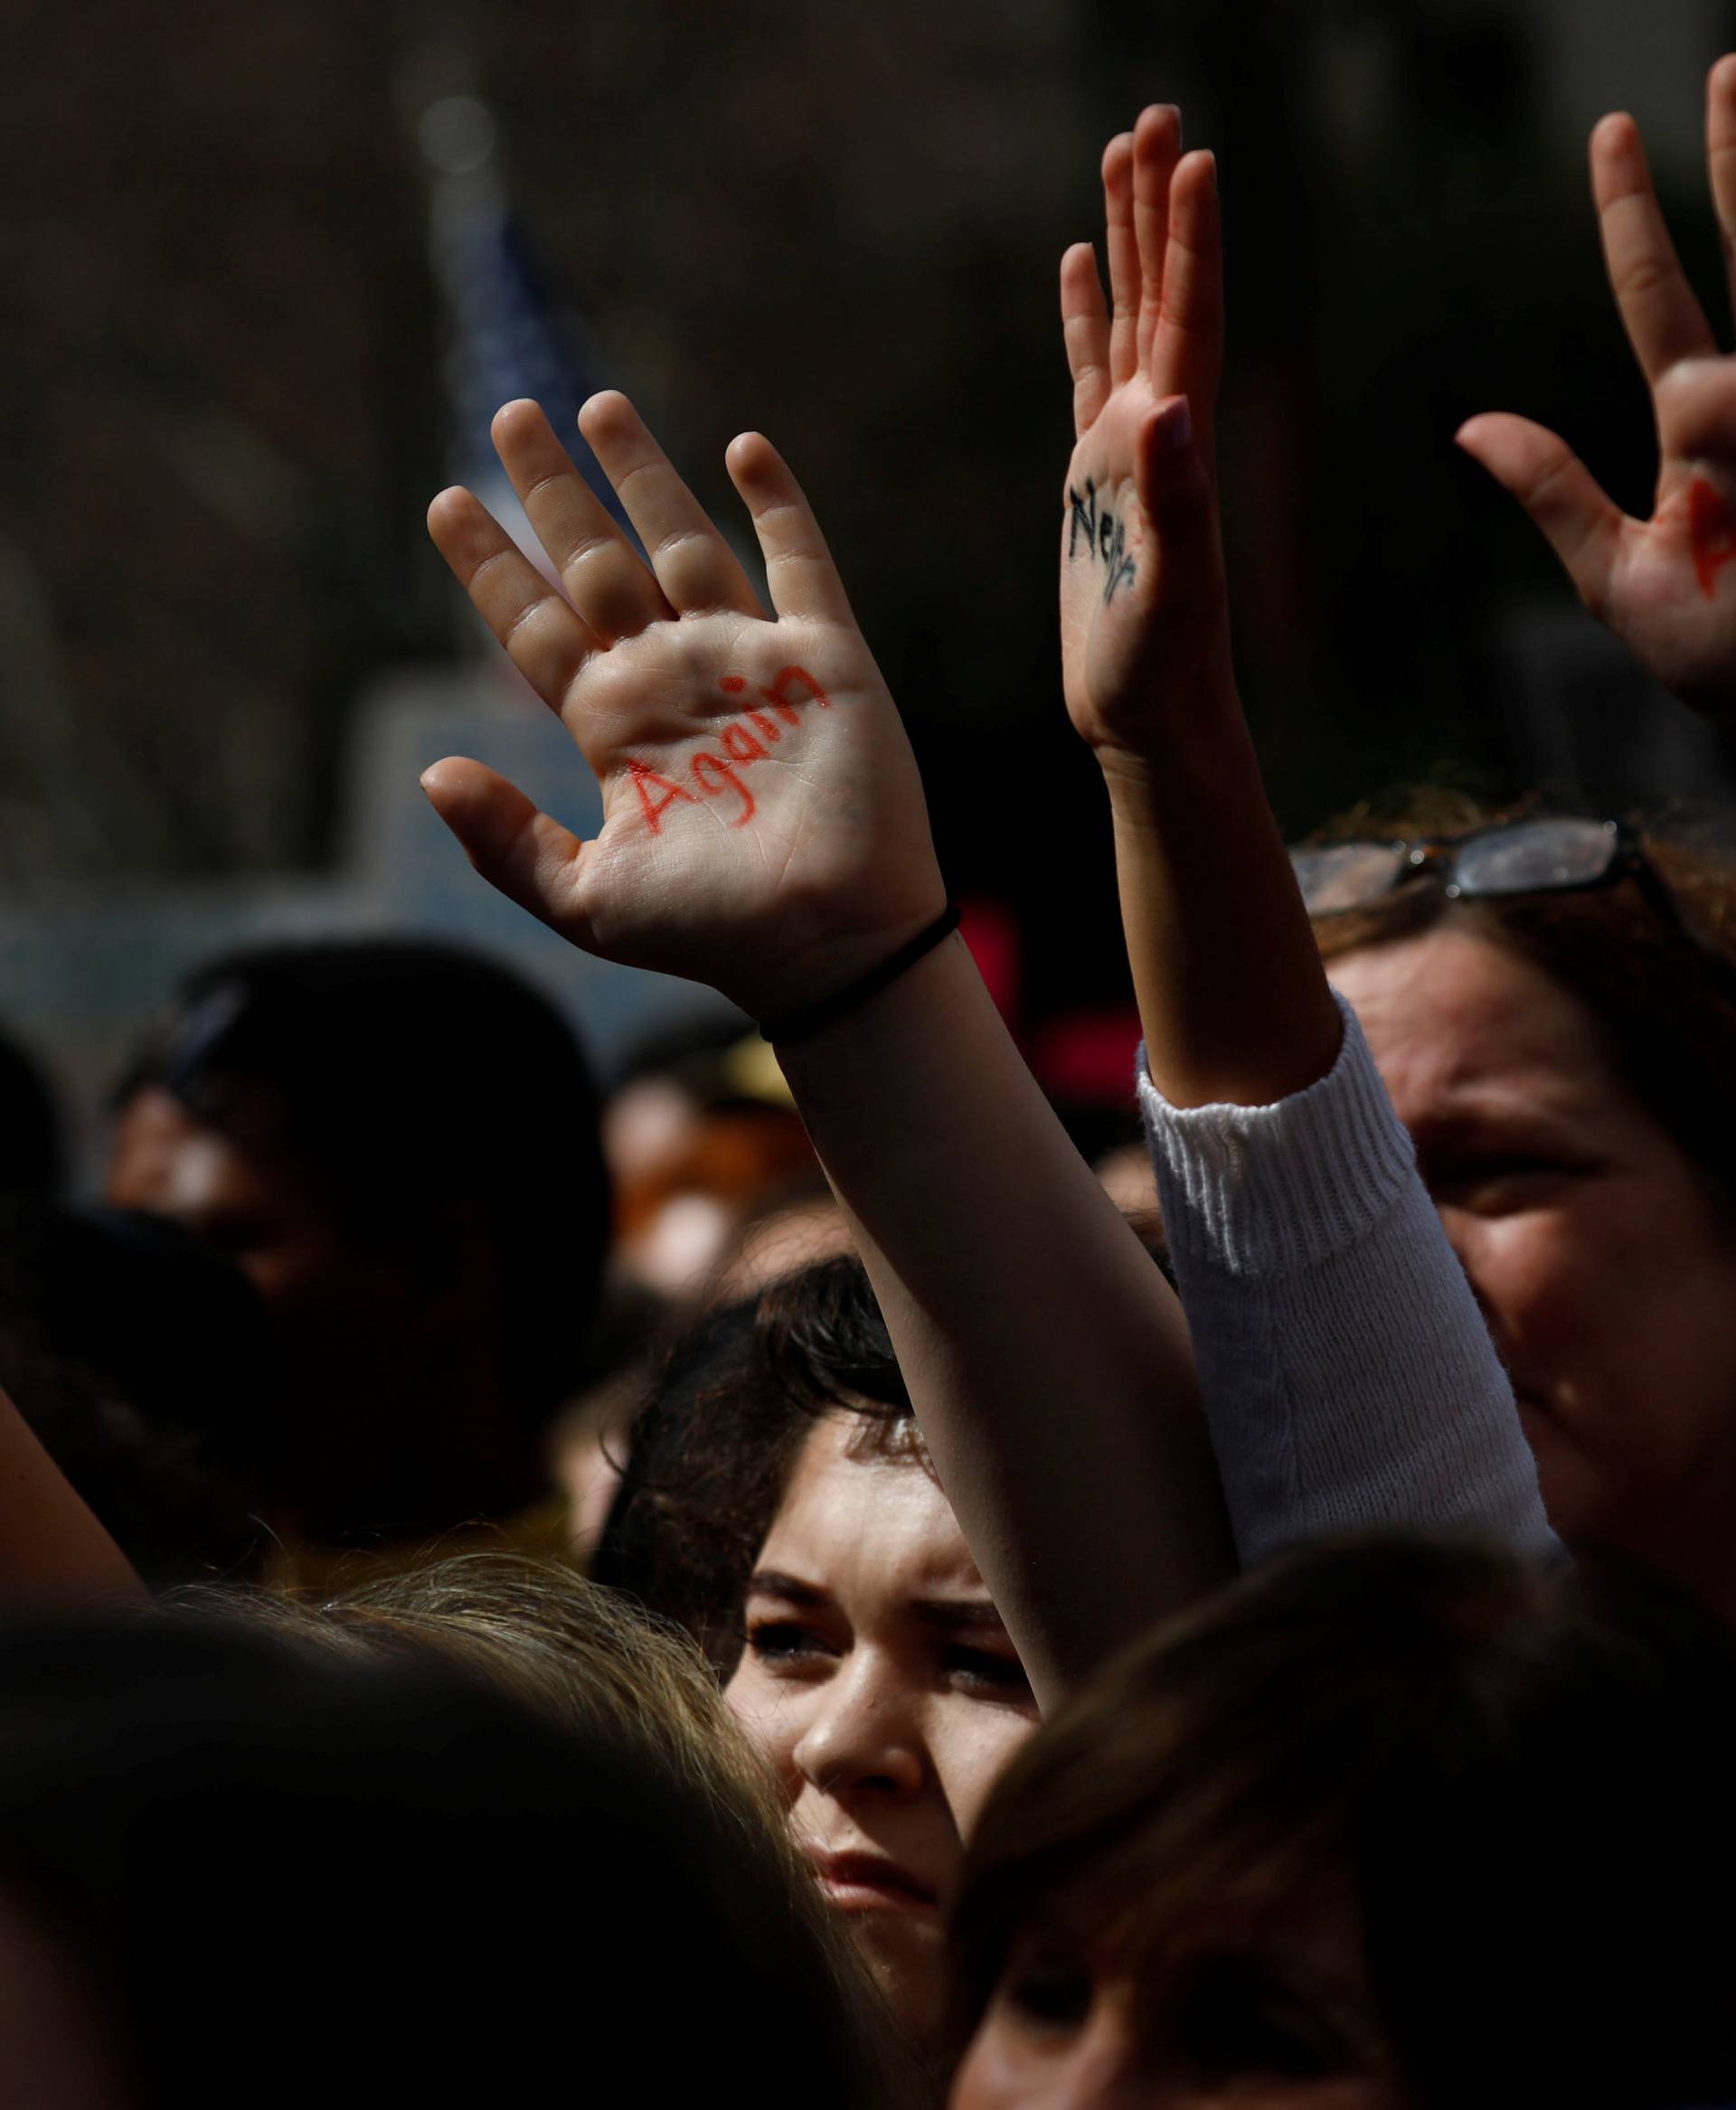 People hold their hands into the air painted with "never again" during "March for Our Lives", an organized demonstration to end gun violence, in downtown Los Angeles